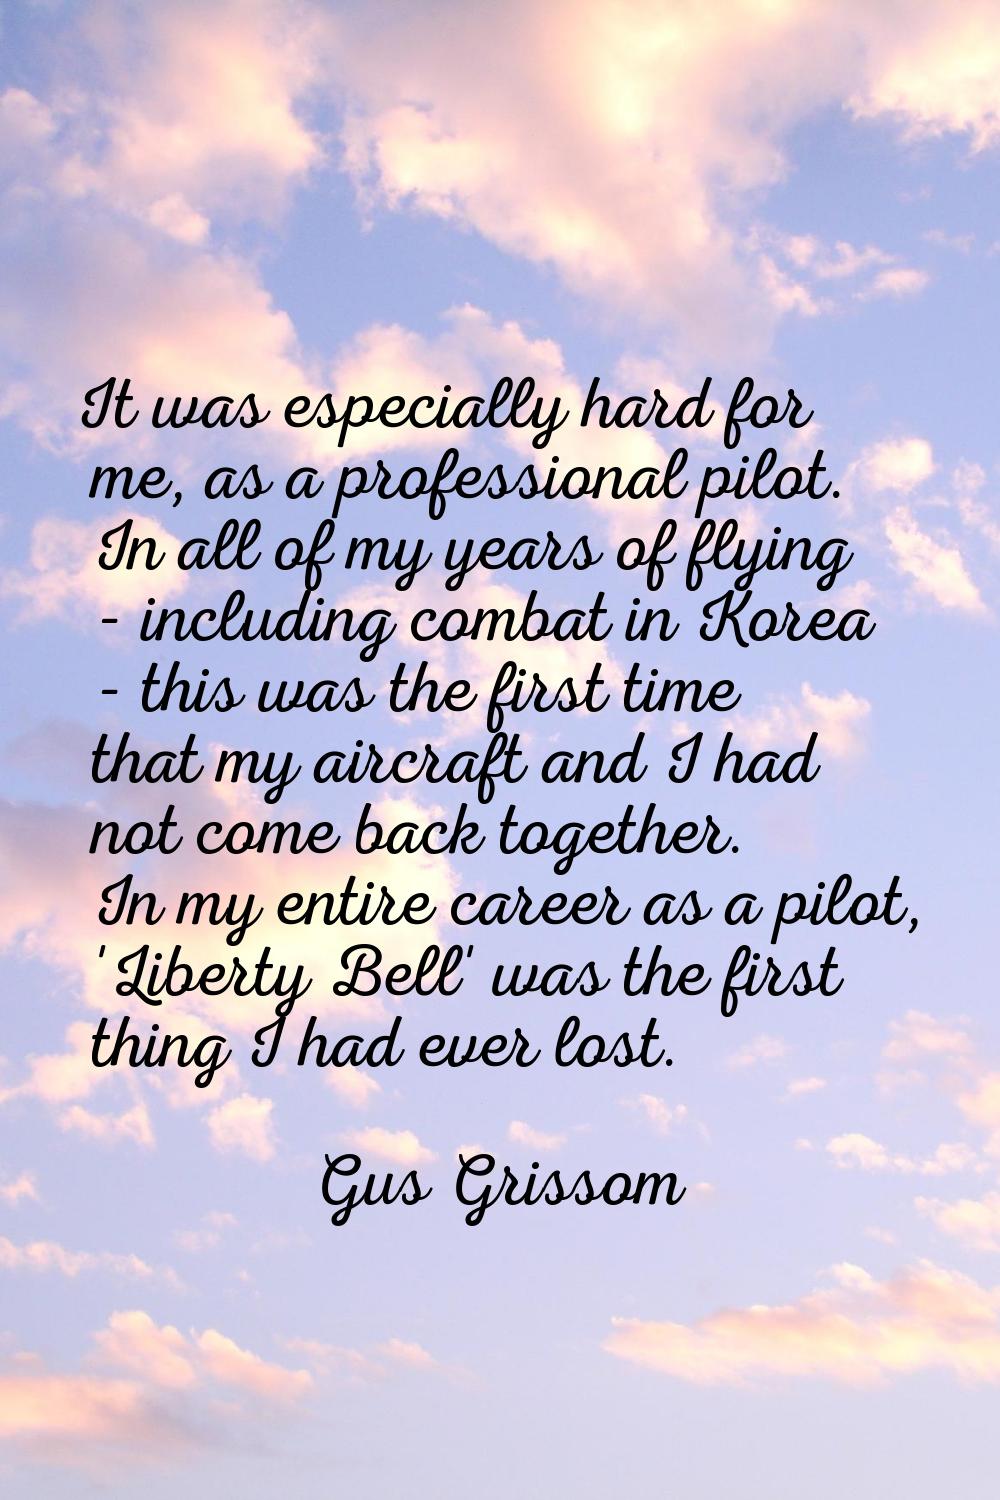 It was especially hard for me, as a professional pilot. In all of my years of flying - including co